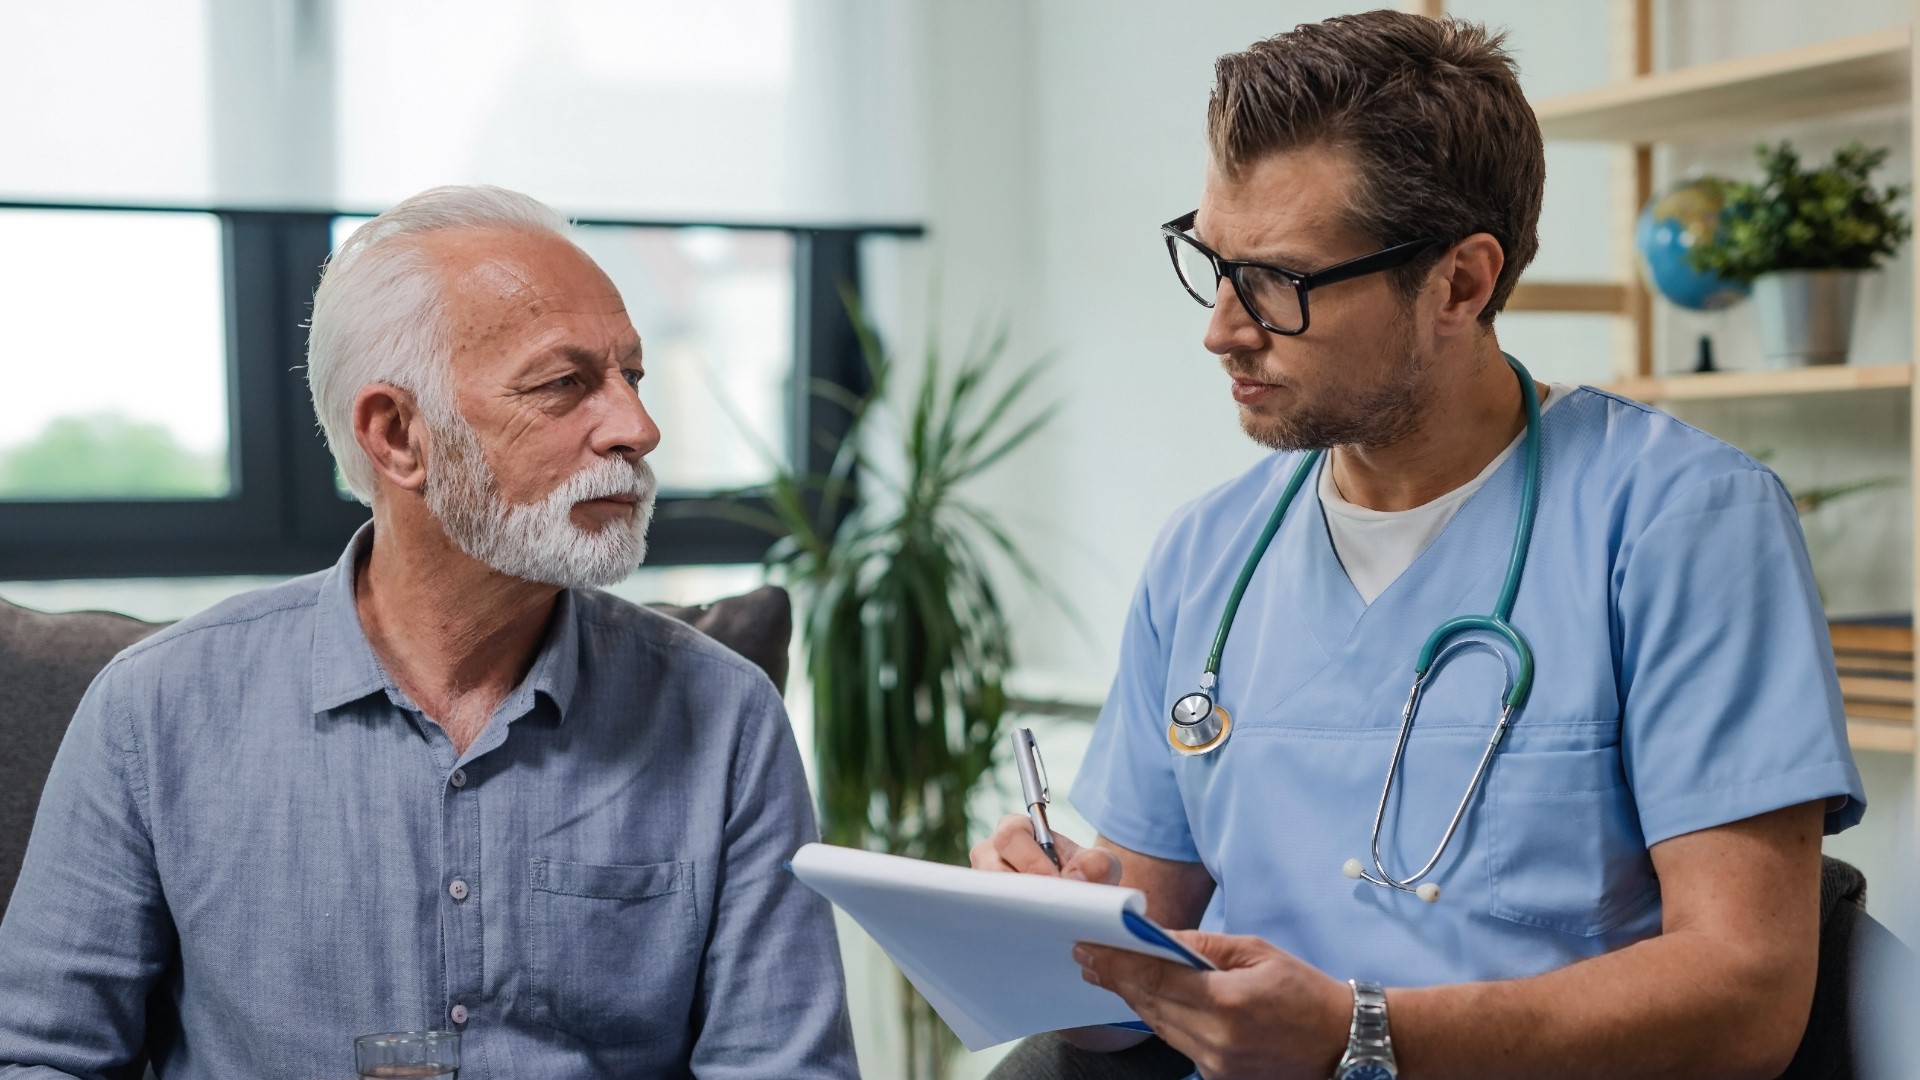 Regular screenings can catch prostate cancer early and potentially save lives.  Sponsored by Overlake Medical Center.